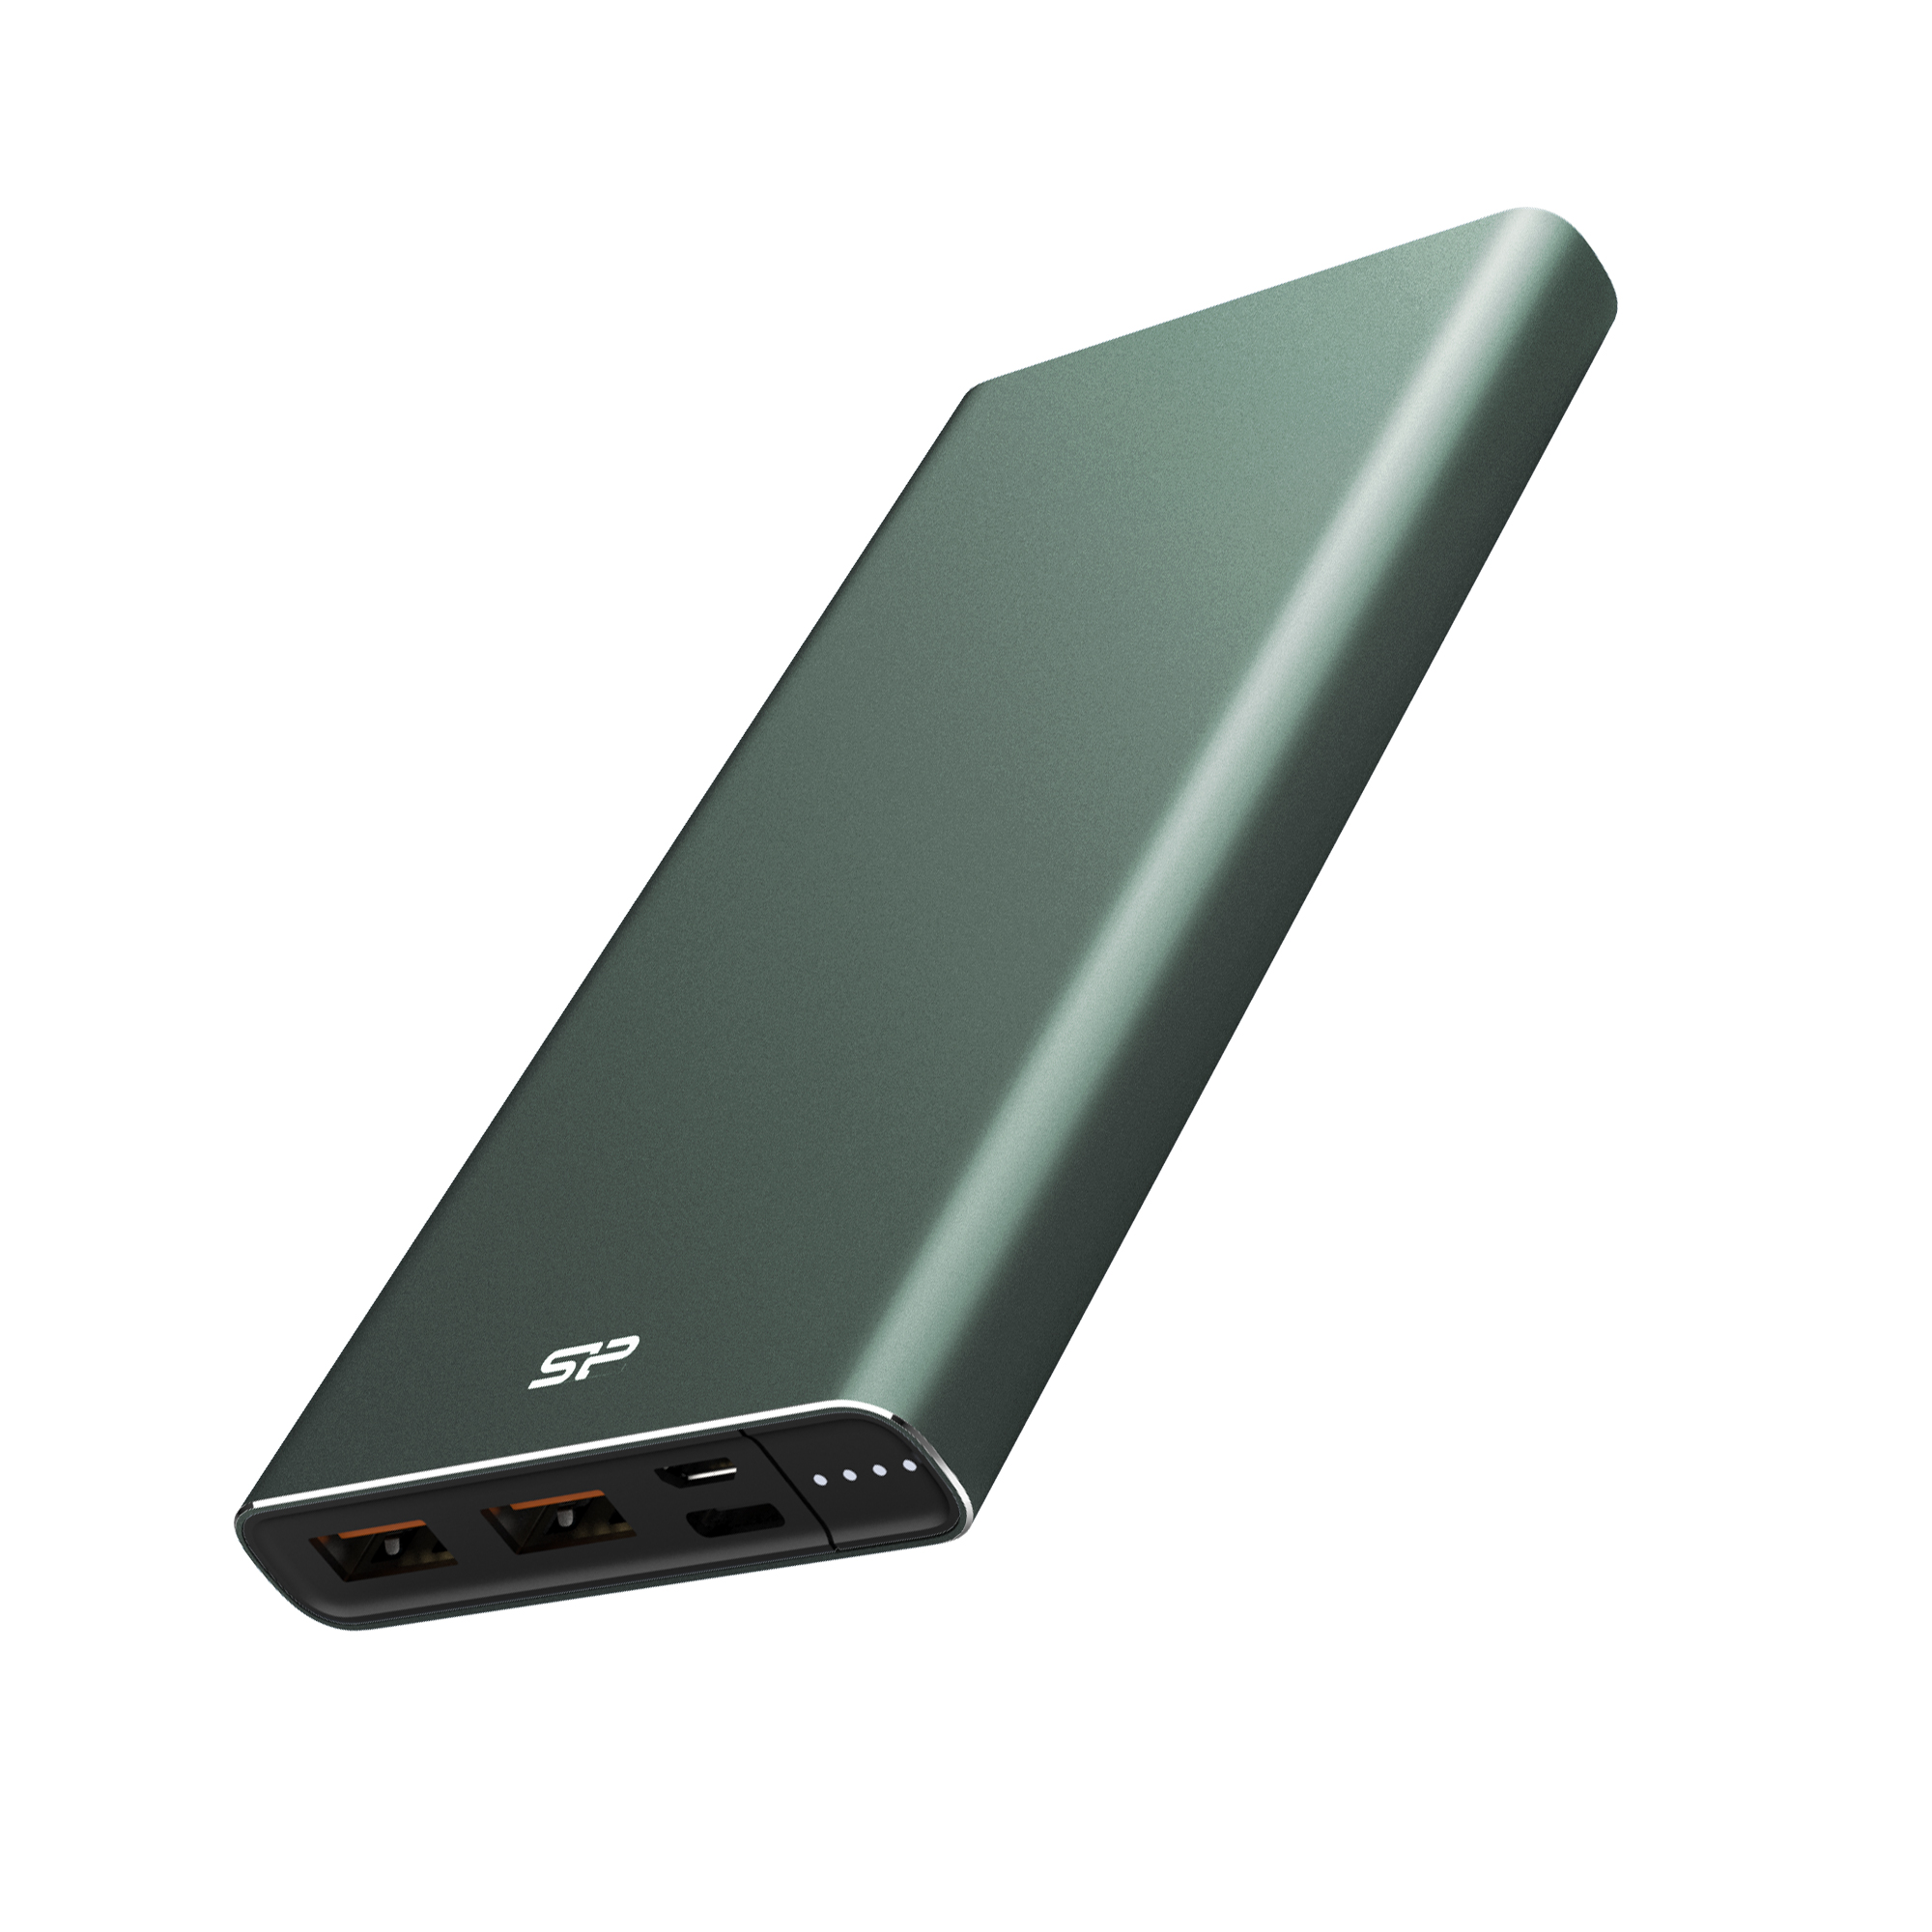 Silicon Power QP60 10000mAh 18W PD & Quick Charge 3.0 Power Bank Portable Charger - Midnight Green